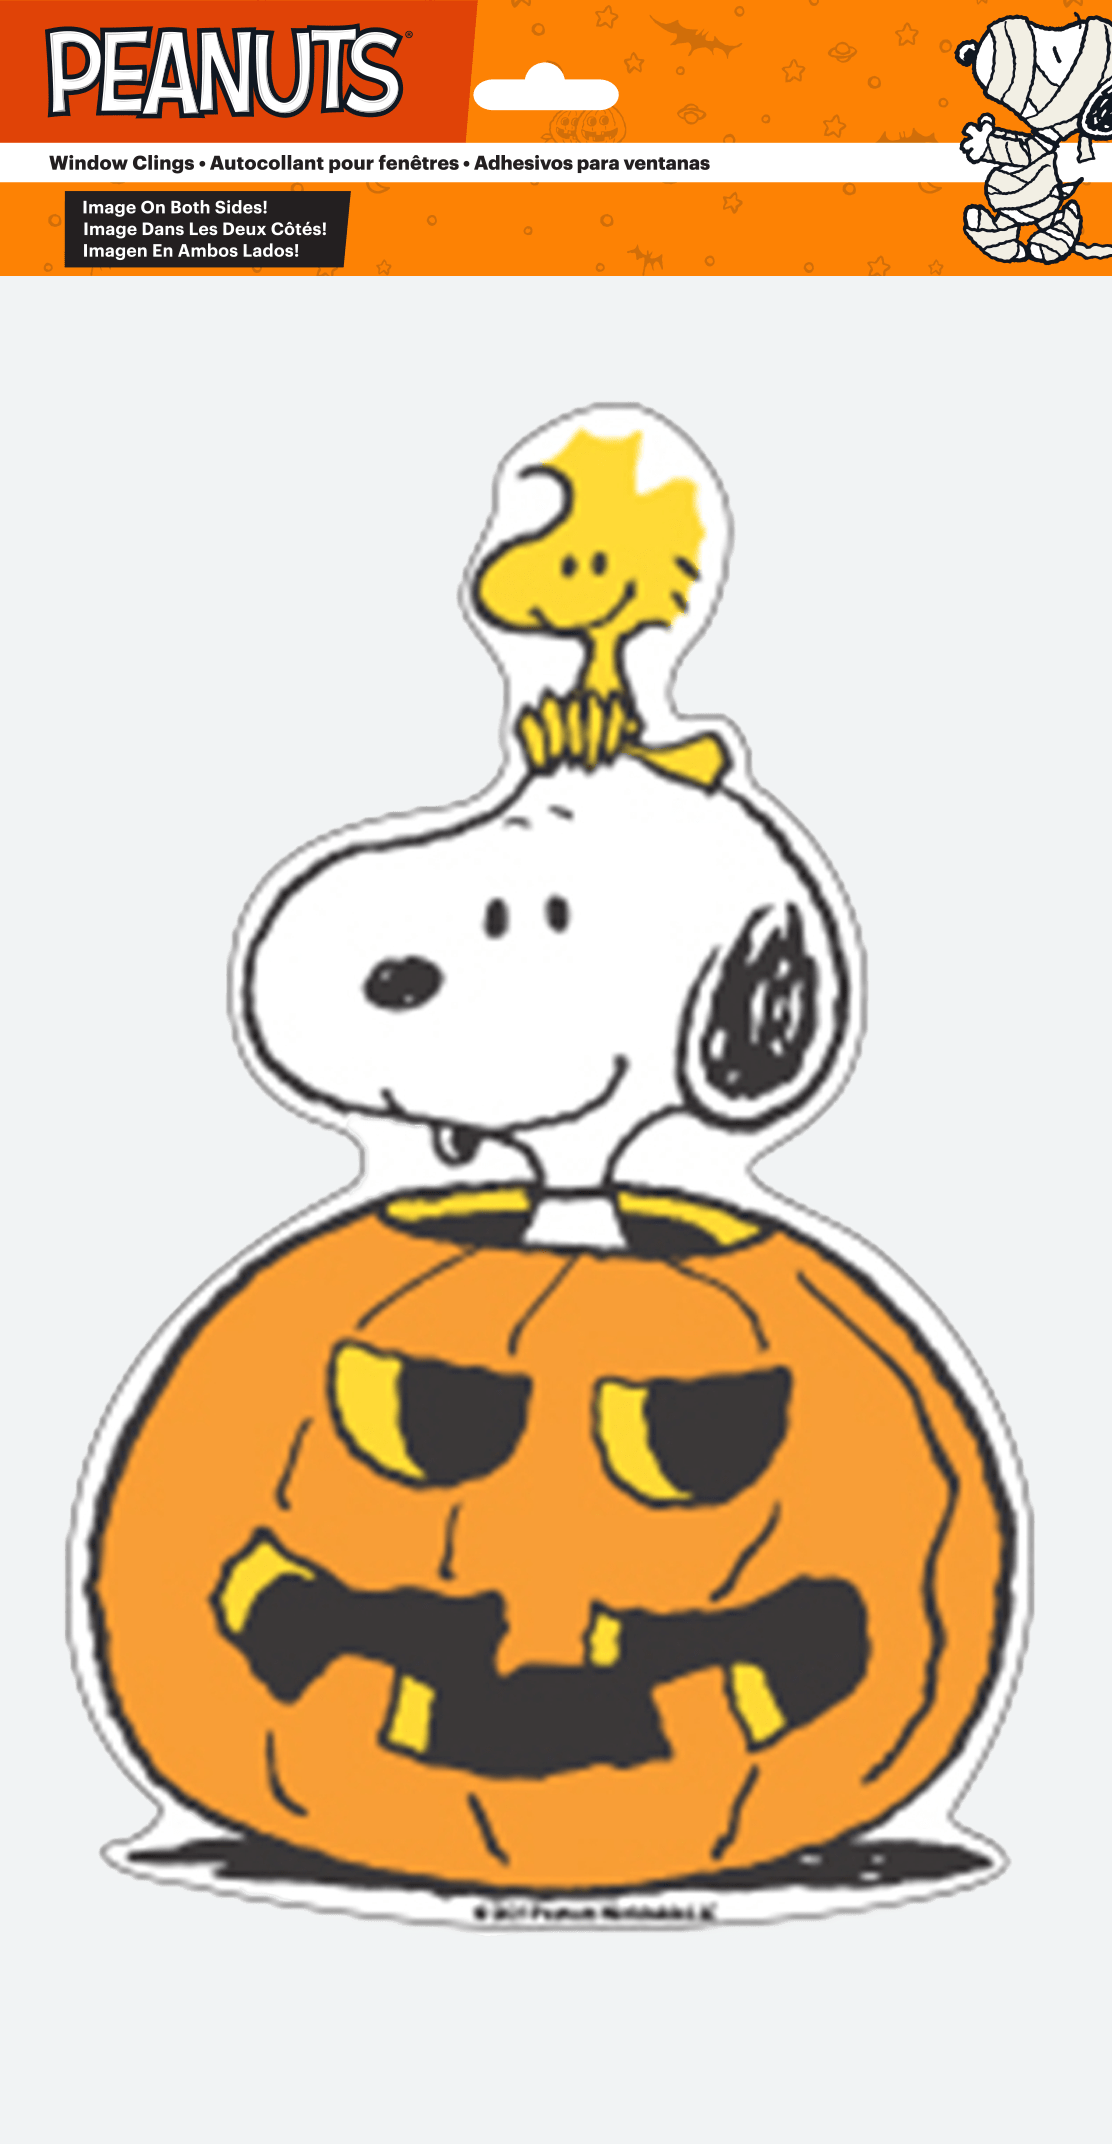 PEANUTS HALLOWEEN CLINGS DOUBLE SIDED 6PK.